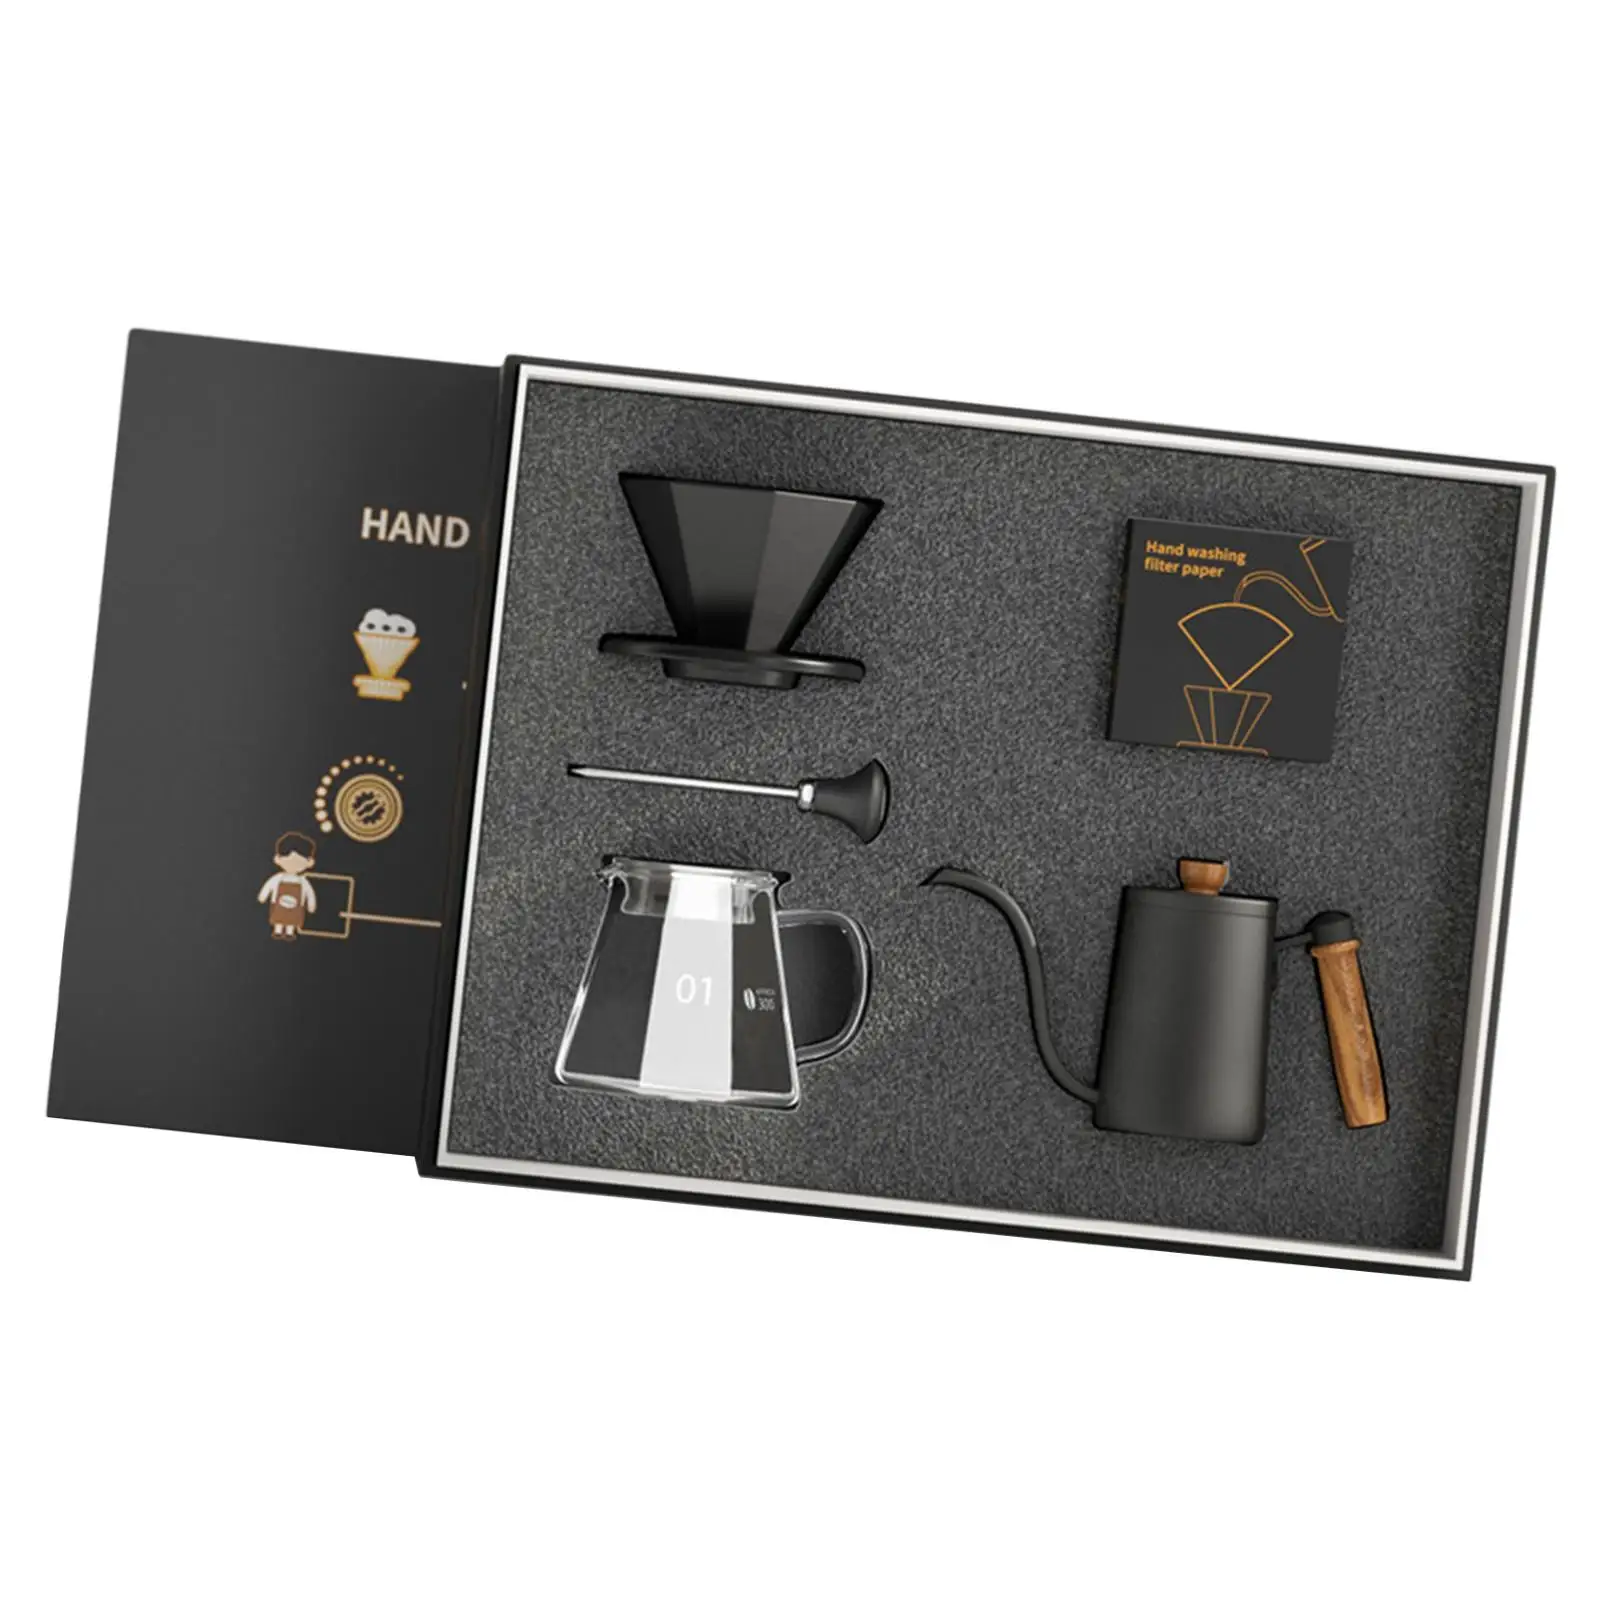 Pour-over coffee machine, kitchen accessories, with thermometer, gooseneck